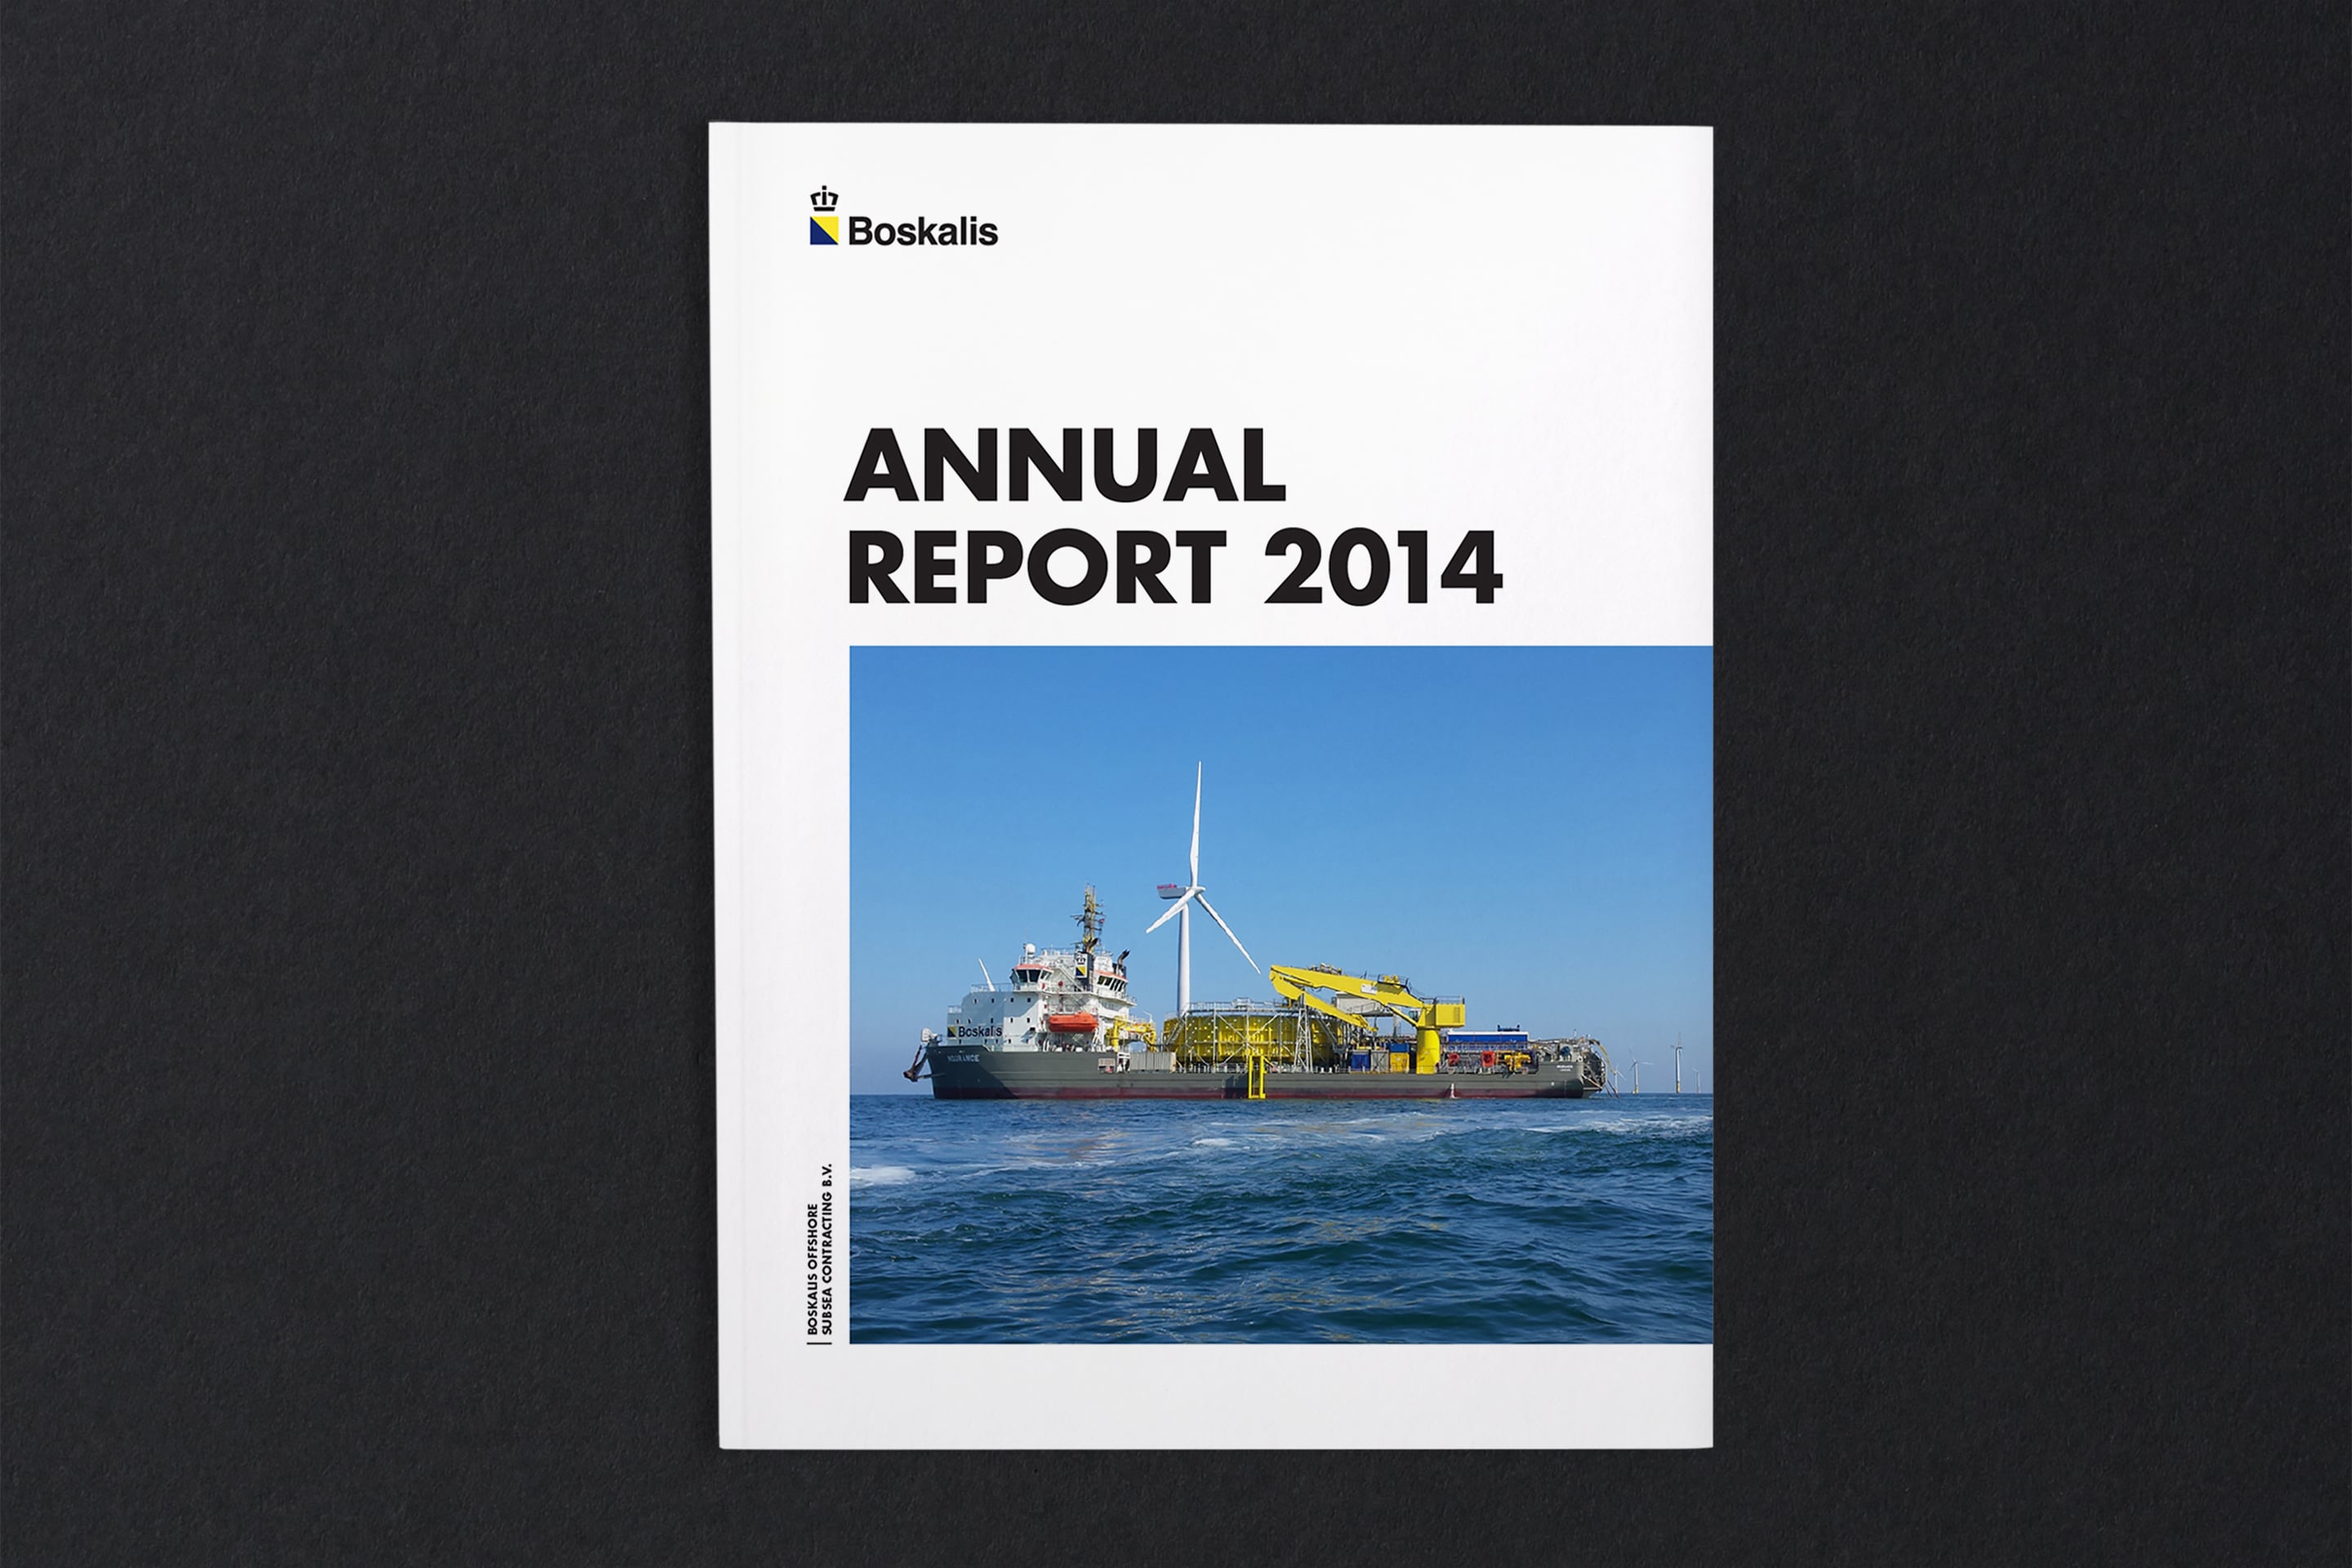 studio dumbar design visual brand identity for Boskalis the leading dredging and marine experts Annual Report print design